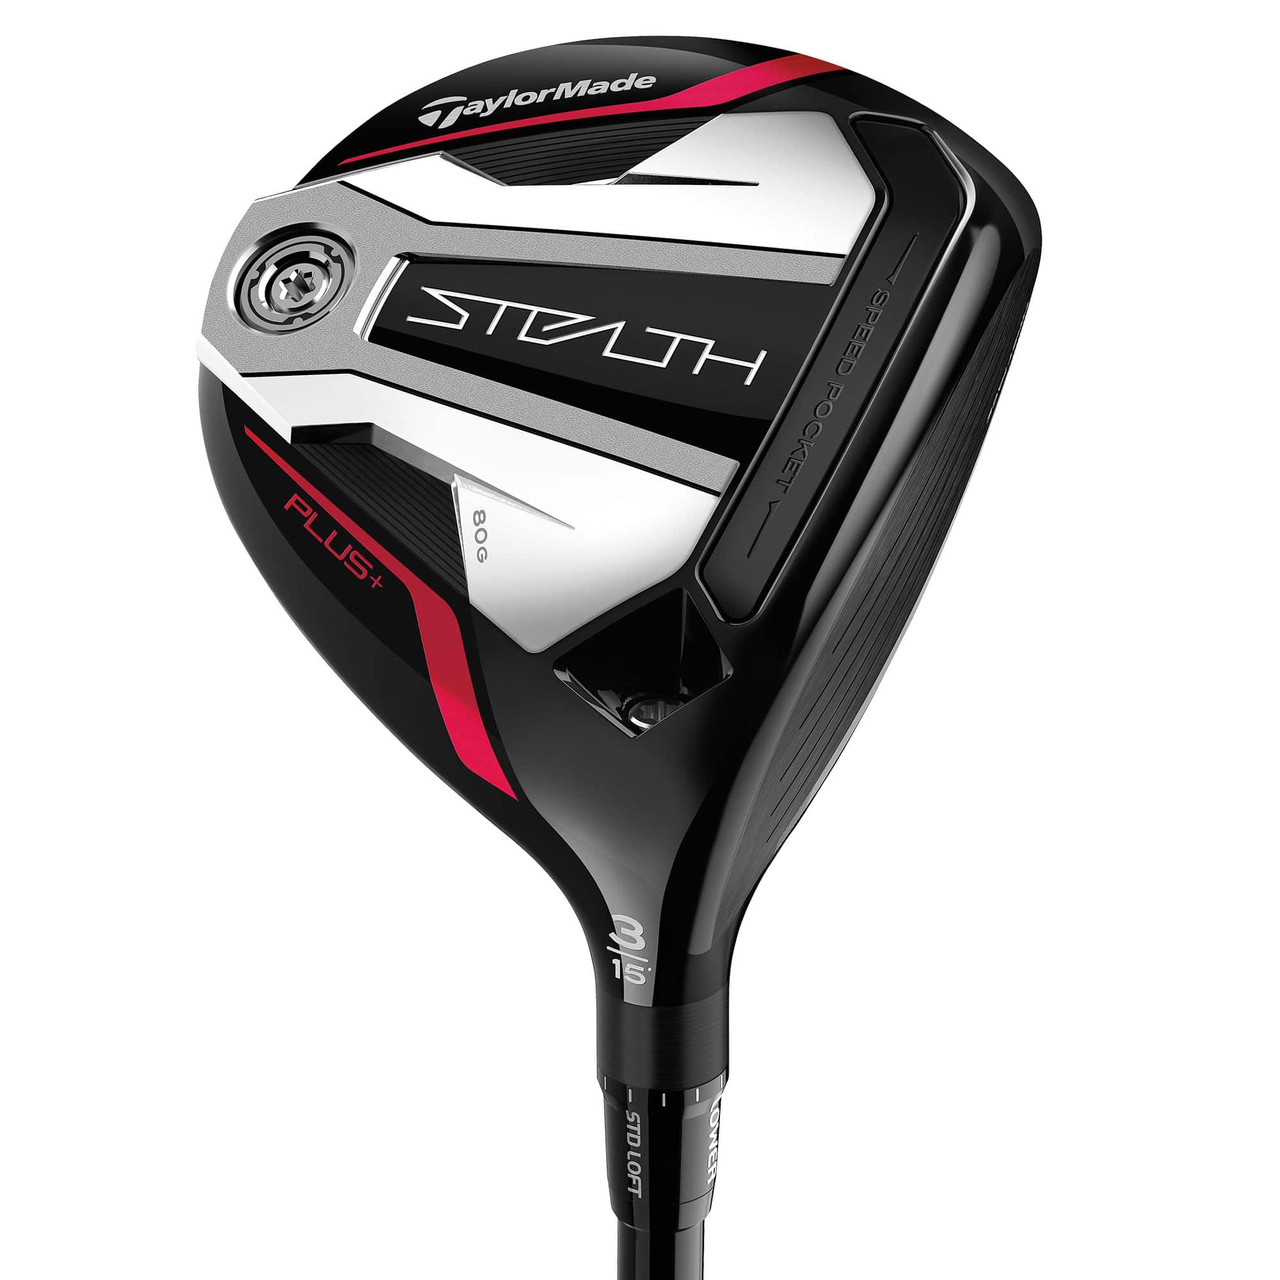 Introducing the Stealth Fairways and Rescues